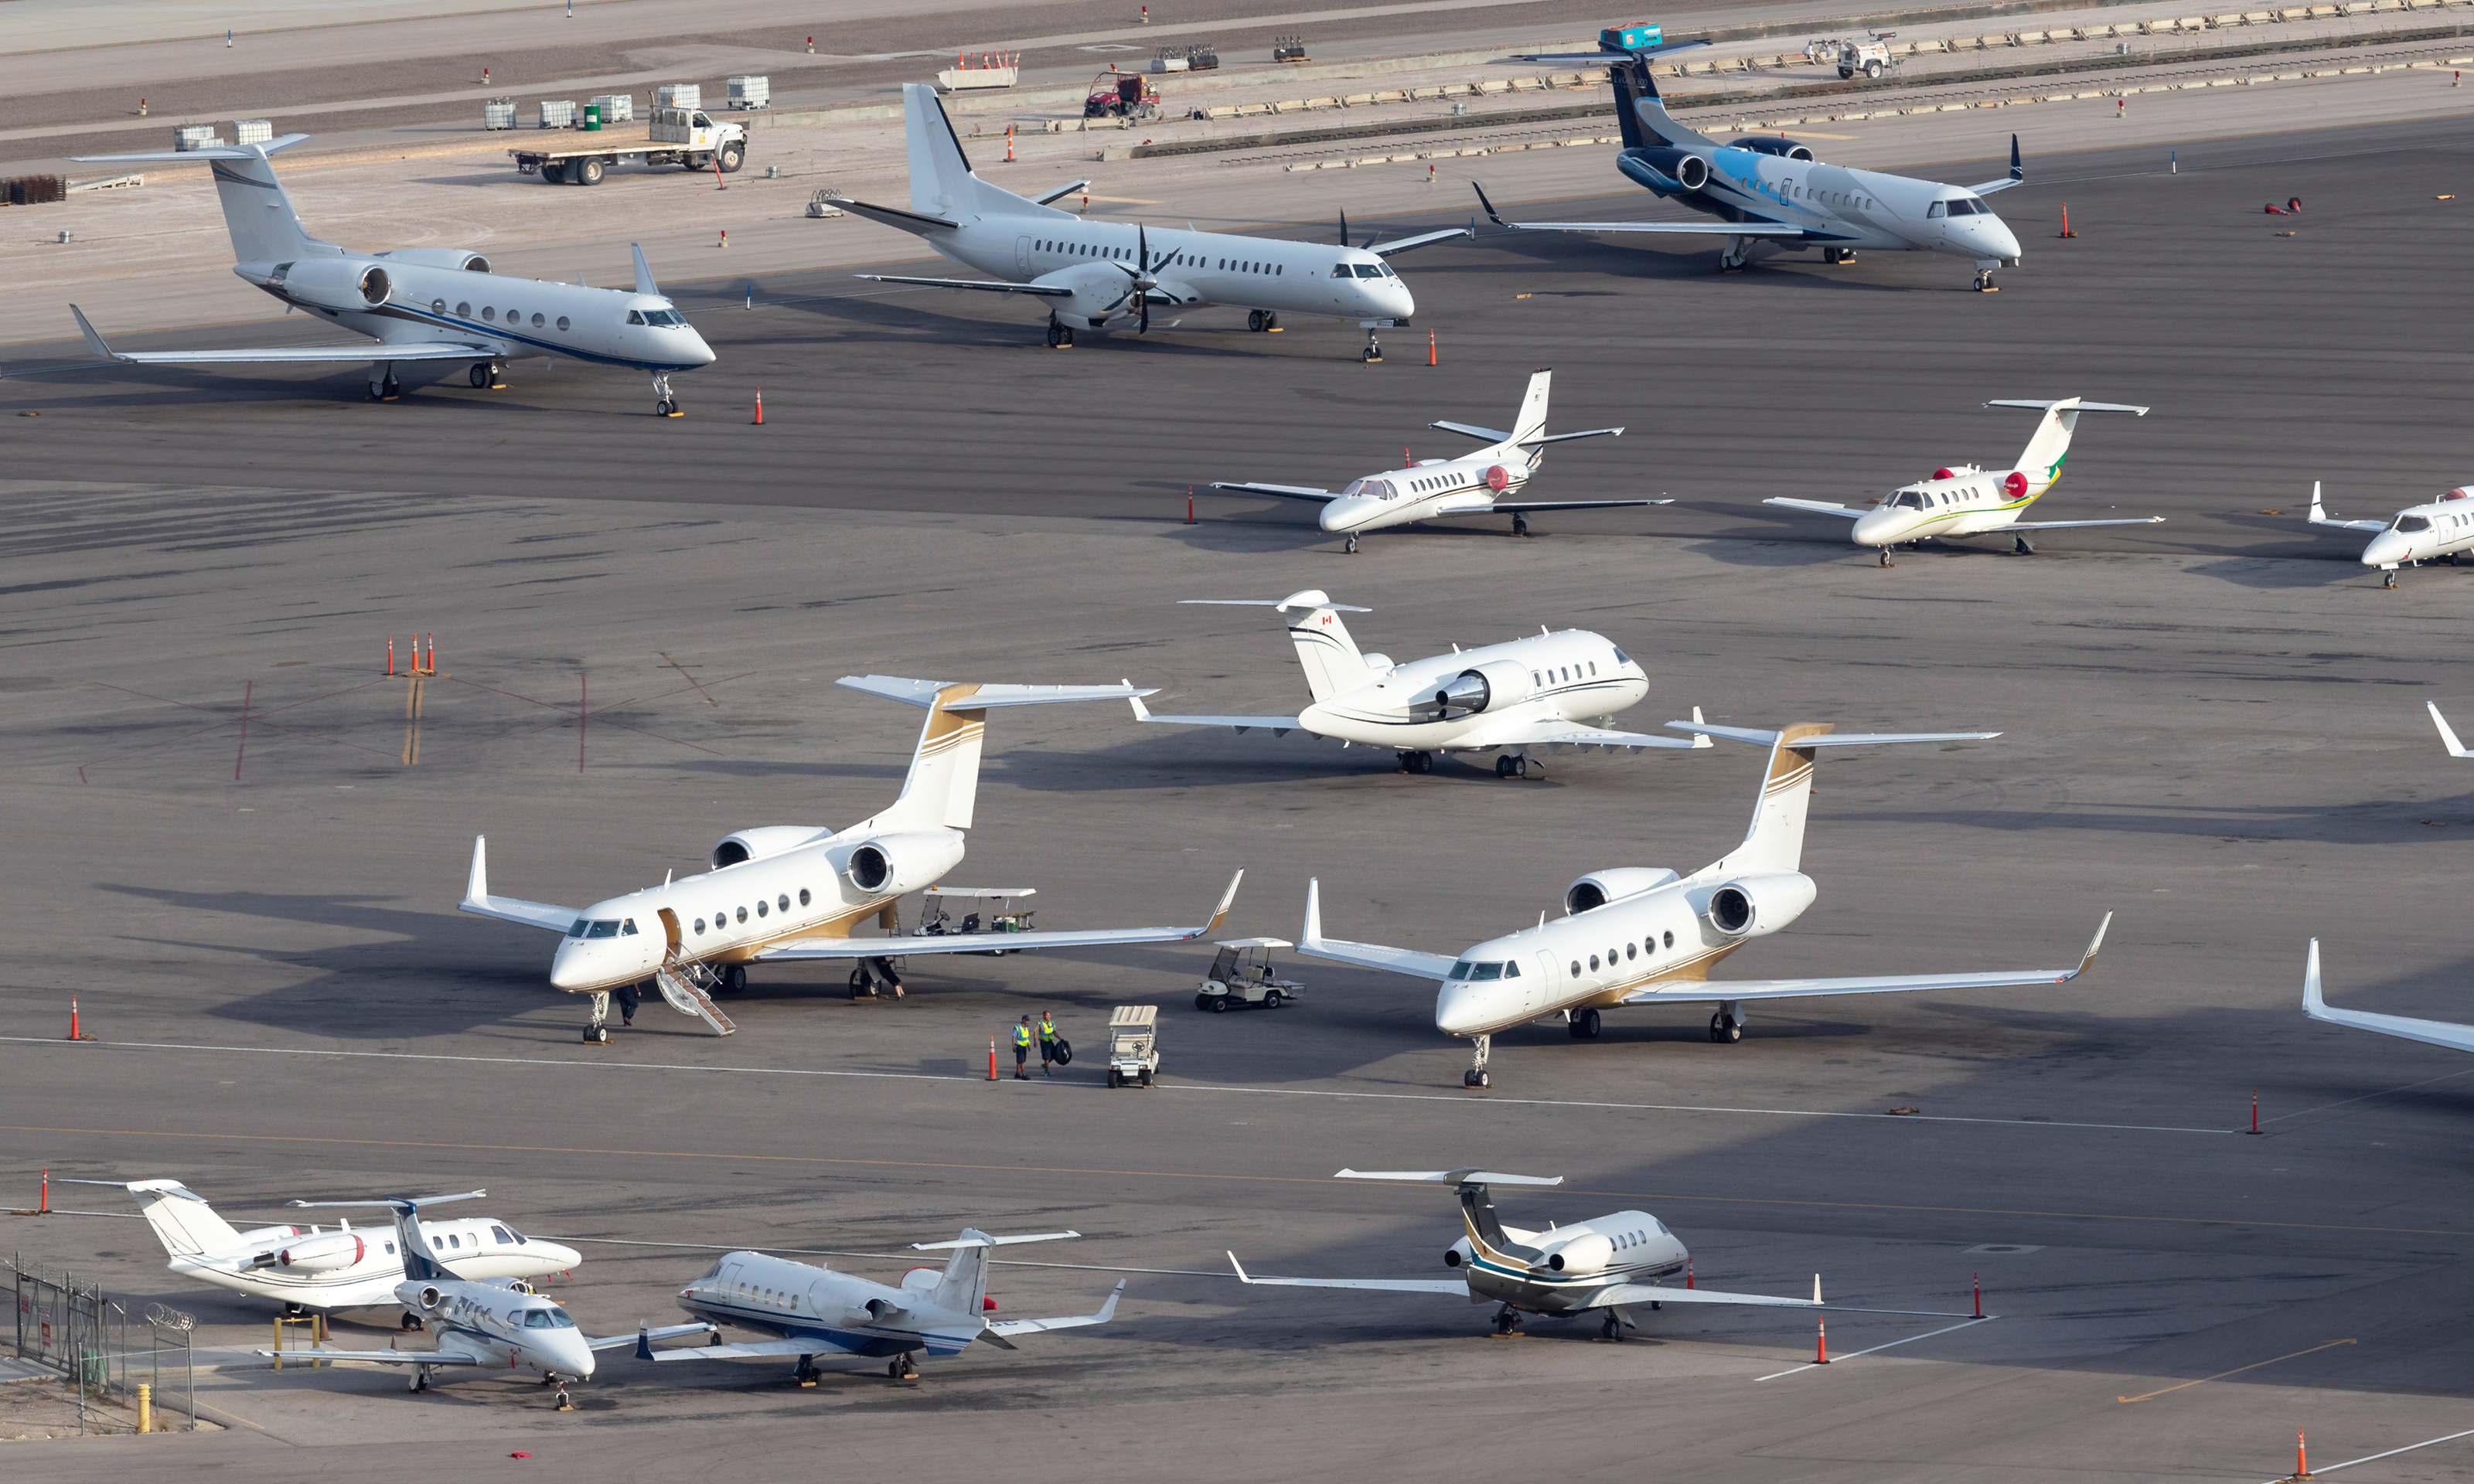 Las Vegas, Nevada, USA - May 5, 2013: Overview of the private jet ramp at McCarran International Airport Las Vegas with multiple luxury jets parked on the tarmac.